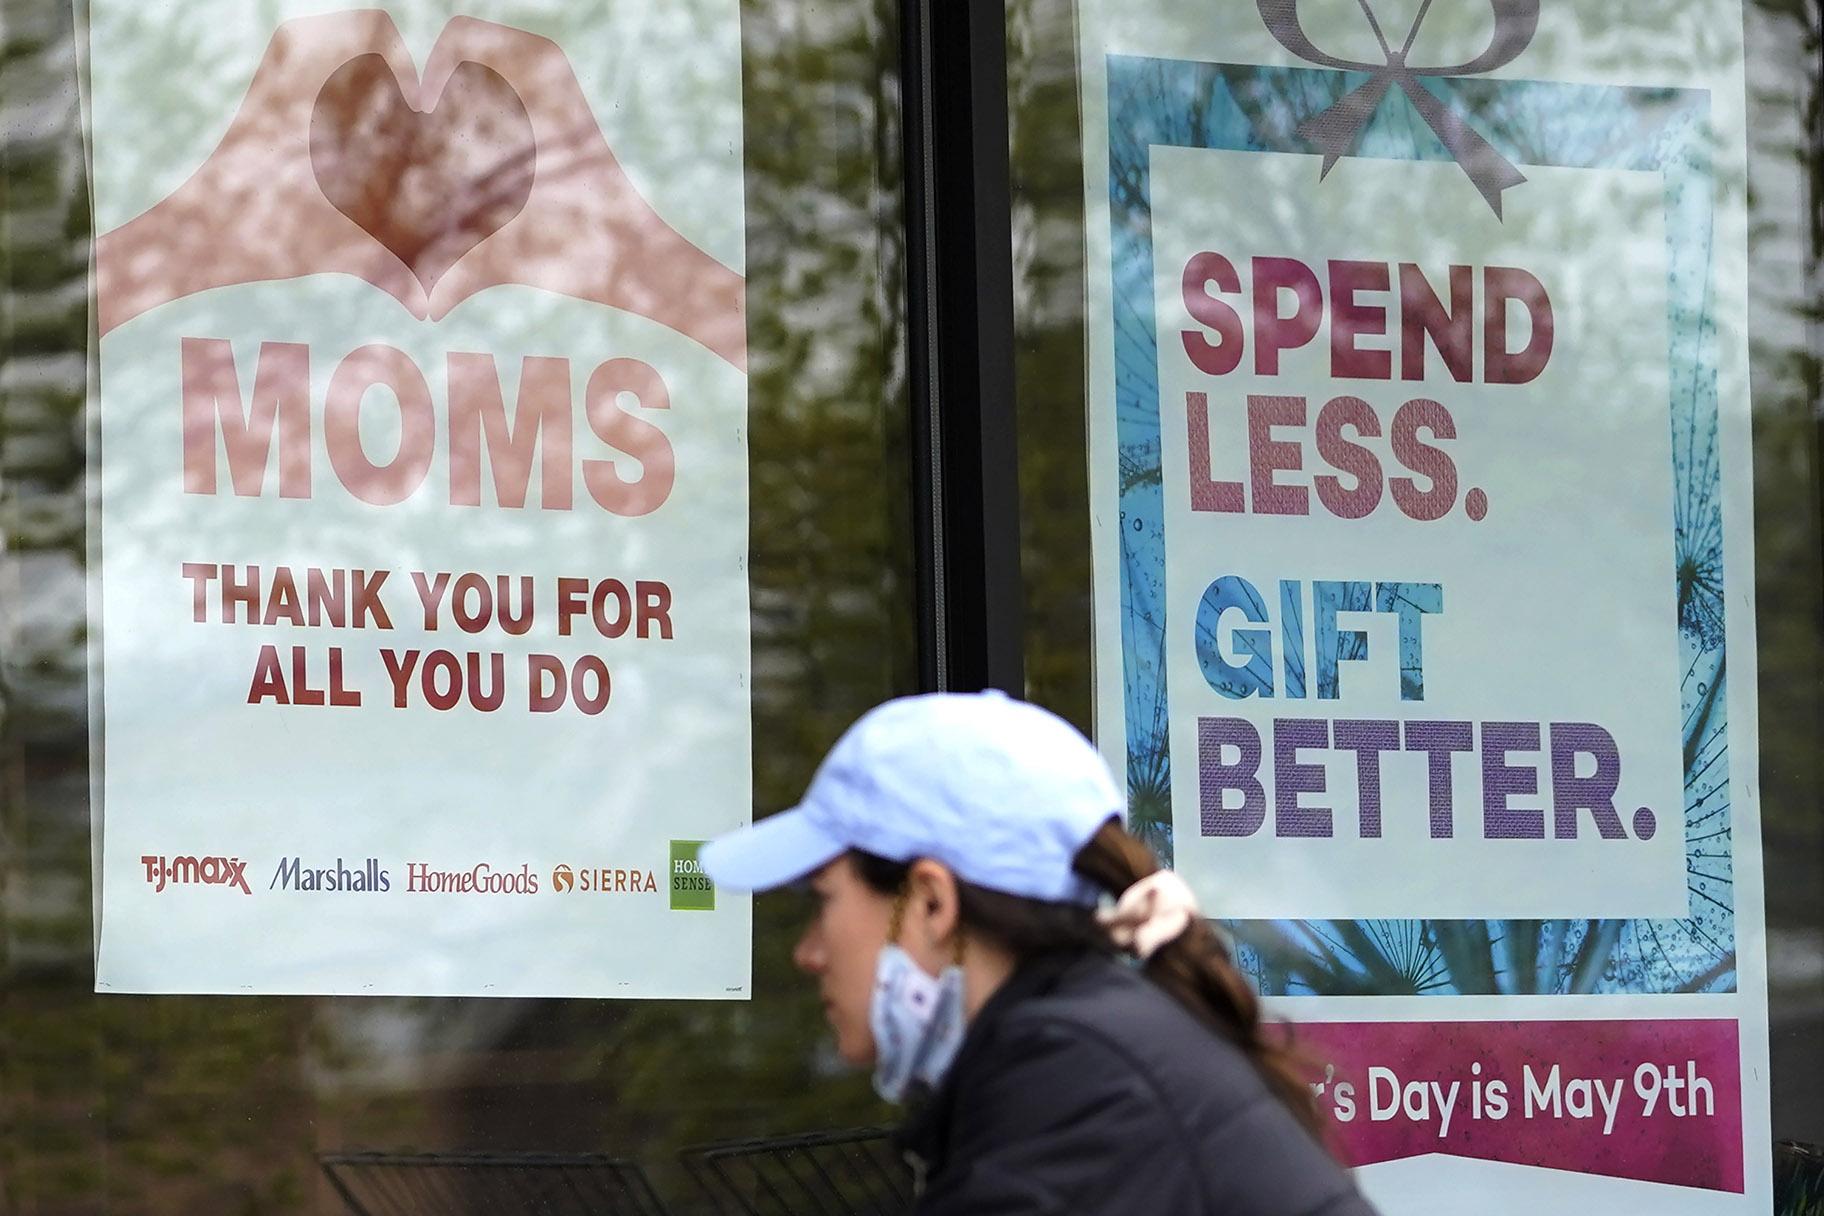 Signs about Mother’s Day are displayed at a home decor department store in Northbrook, Ill., Saturday, May 8, 2021. (AP Photo / Nam Y. Huh)